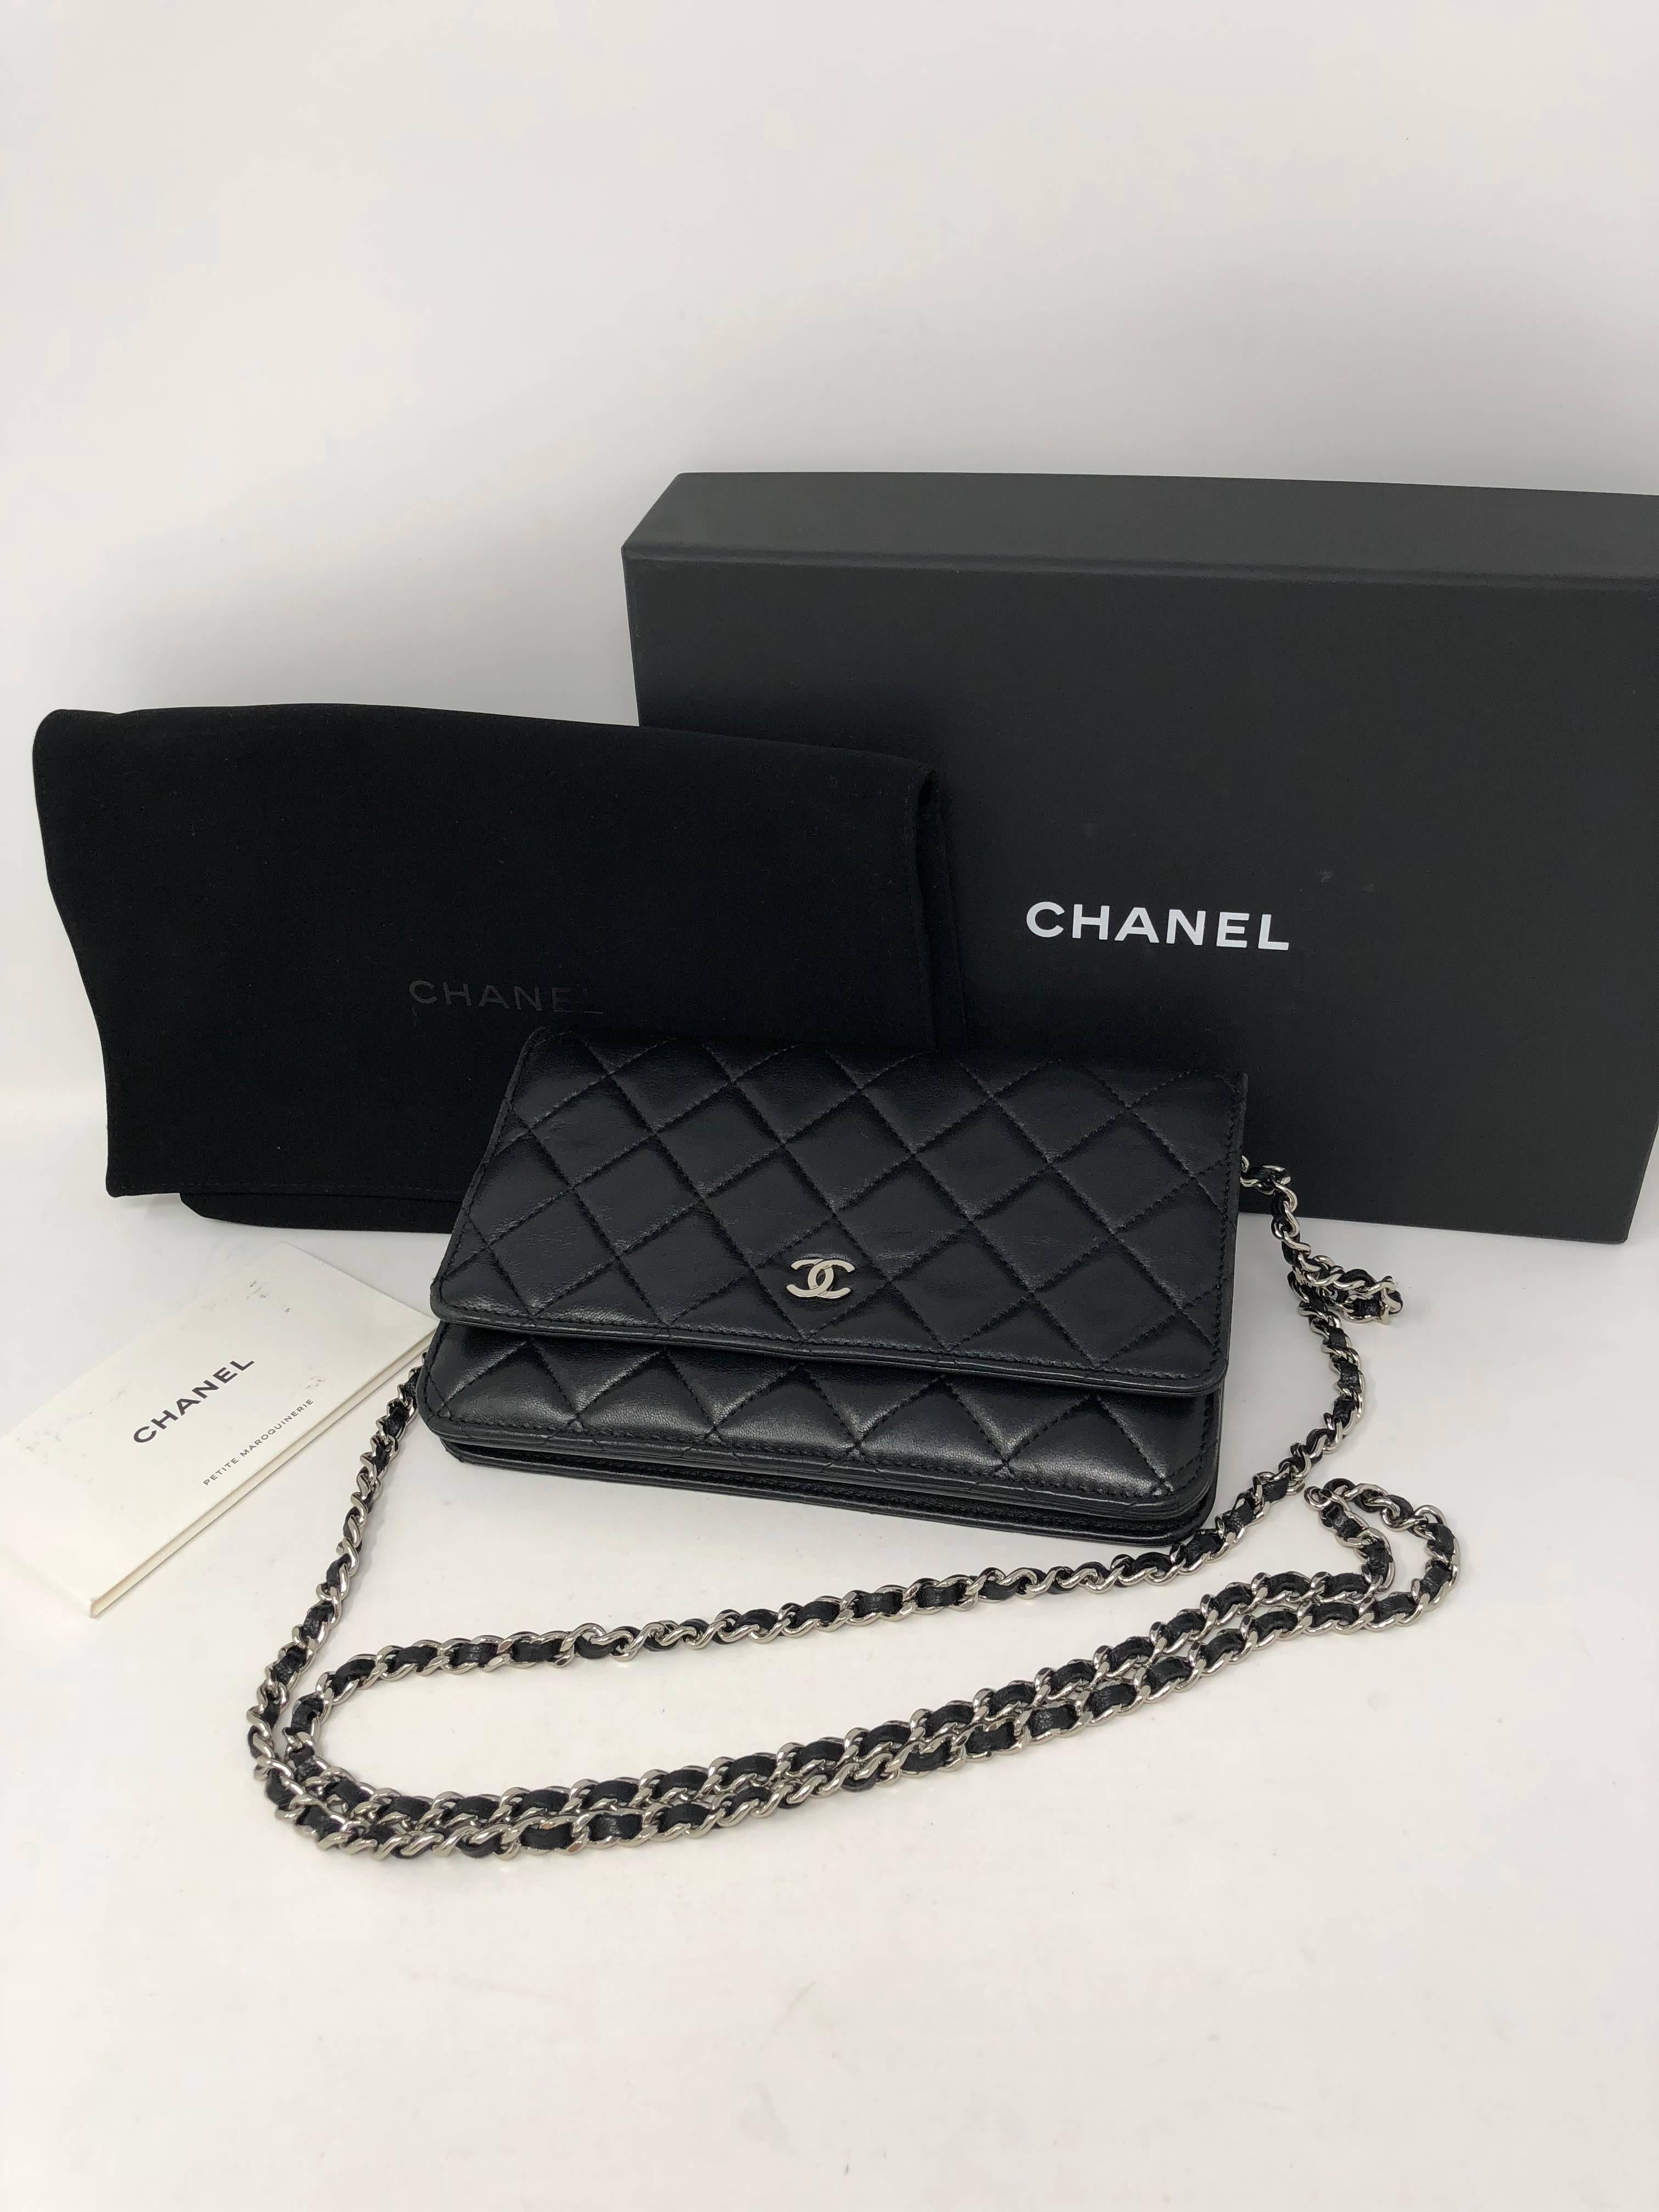 Black Chanel Wallet on Chain Crossbody in lambskin. Silver hardware in mint condition. Comes with dust cover, authenticity card, and original box. Wallet bag can hold several cards and even a phone. Great day to evening bag. Guaranteed authentic.